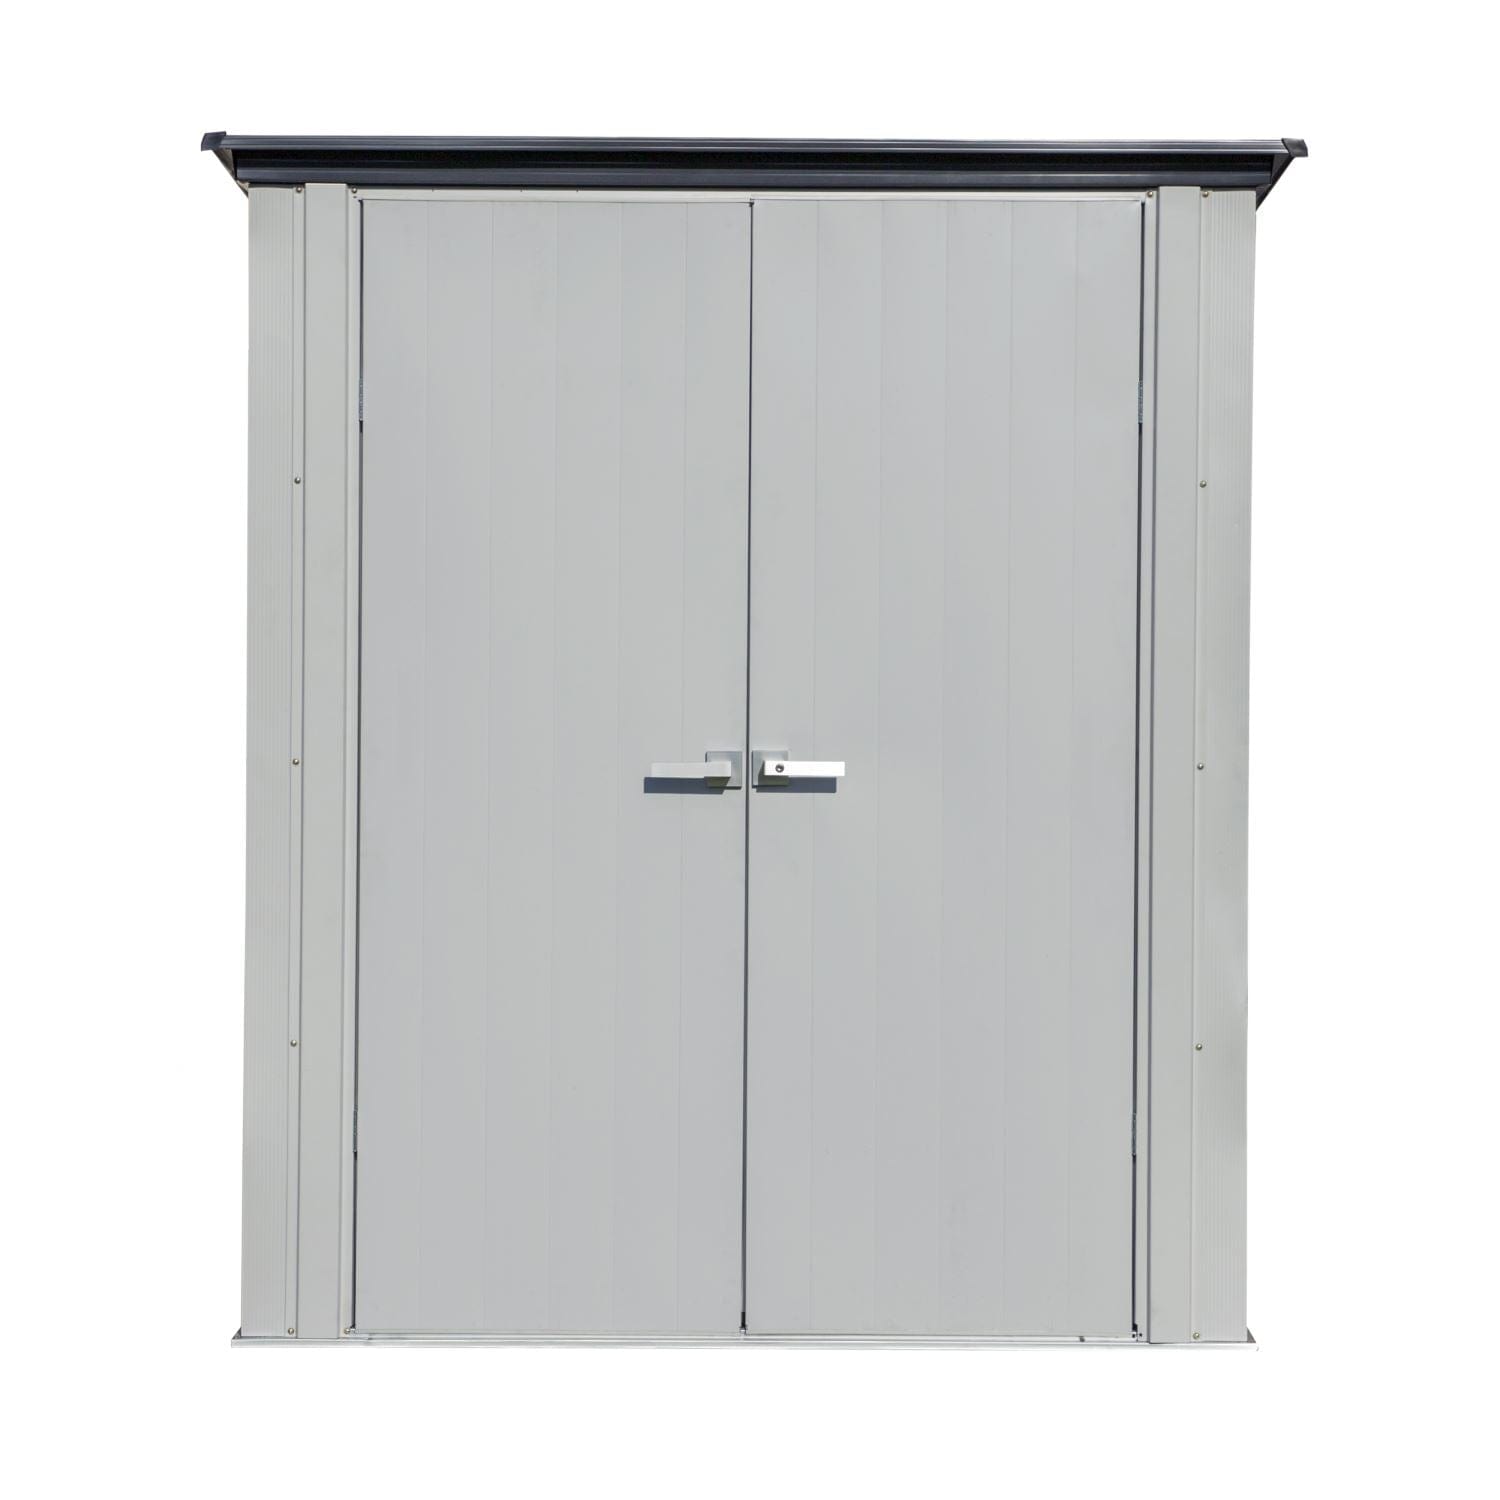 Spacemaker Patio Shed 5' x 3' - Flute Grey and Anthracite - mygreenhousestore.com